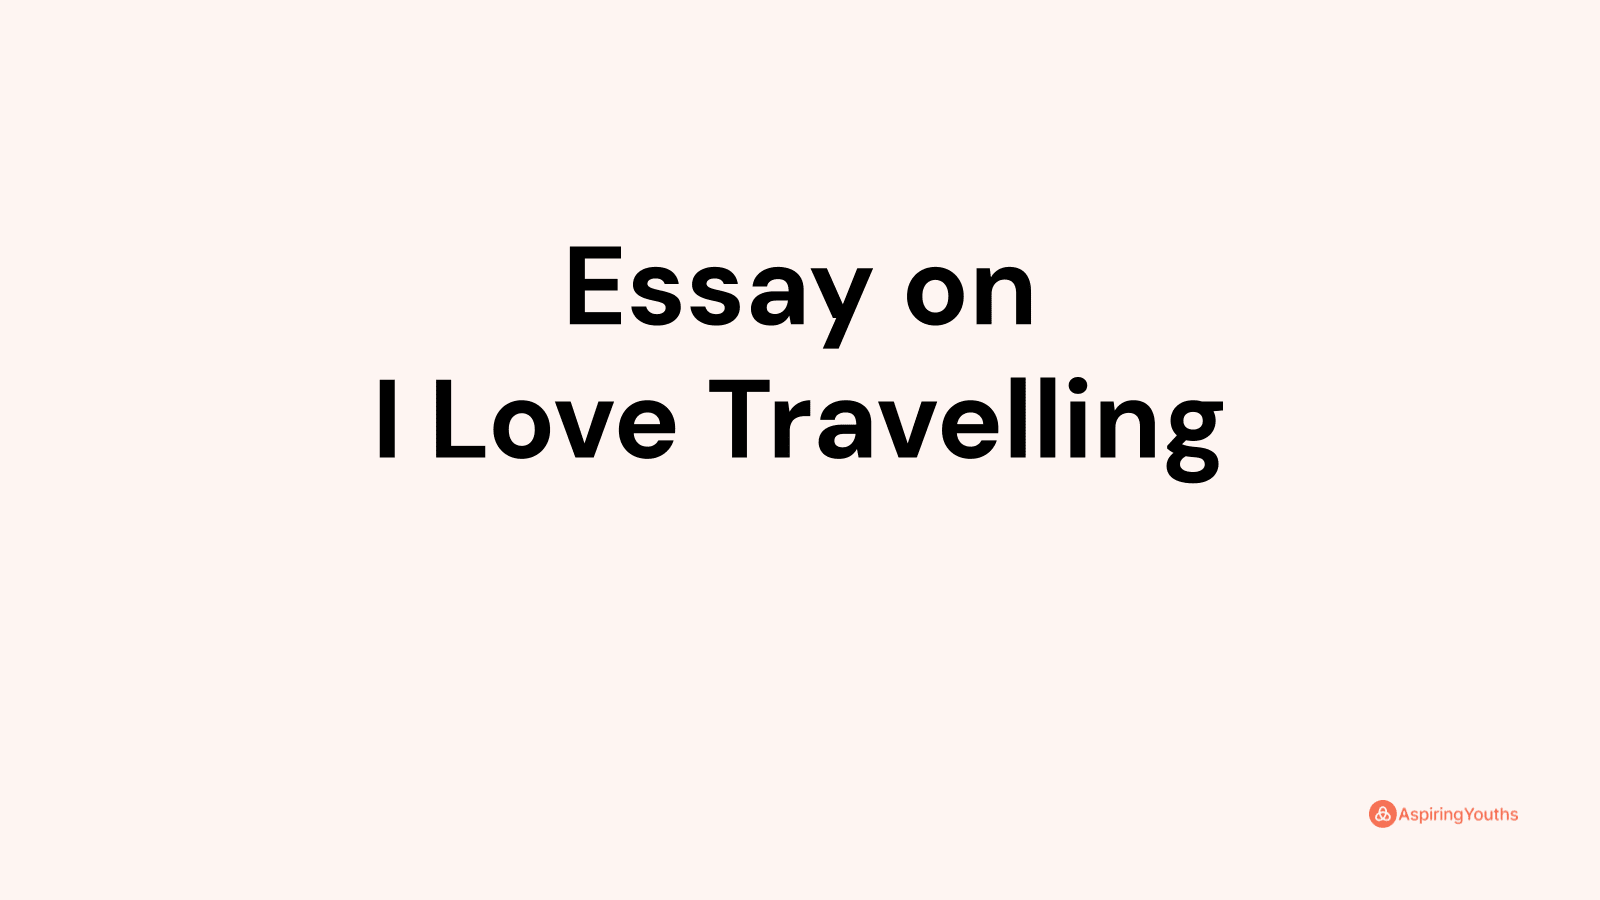 i love travelling because essay